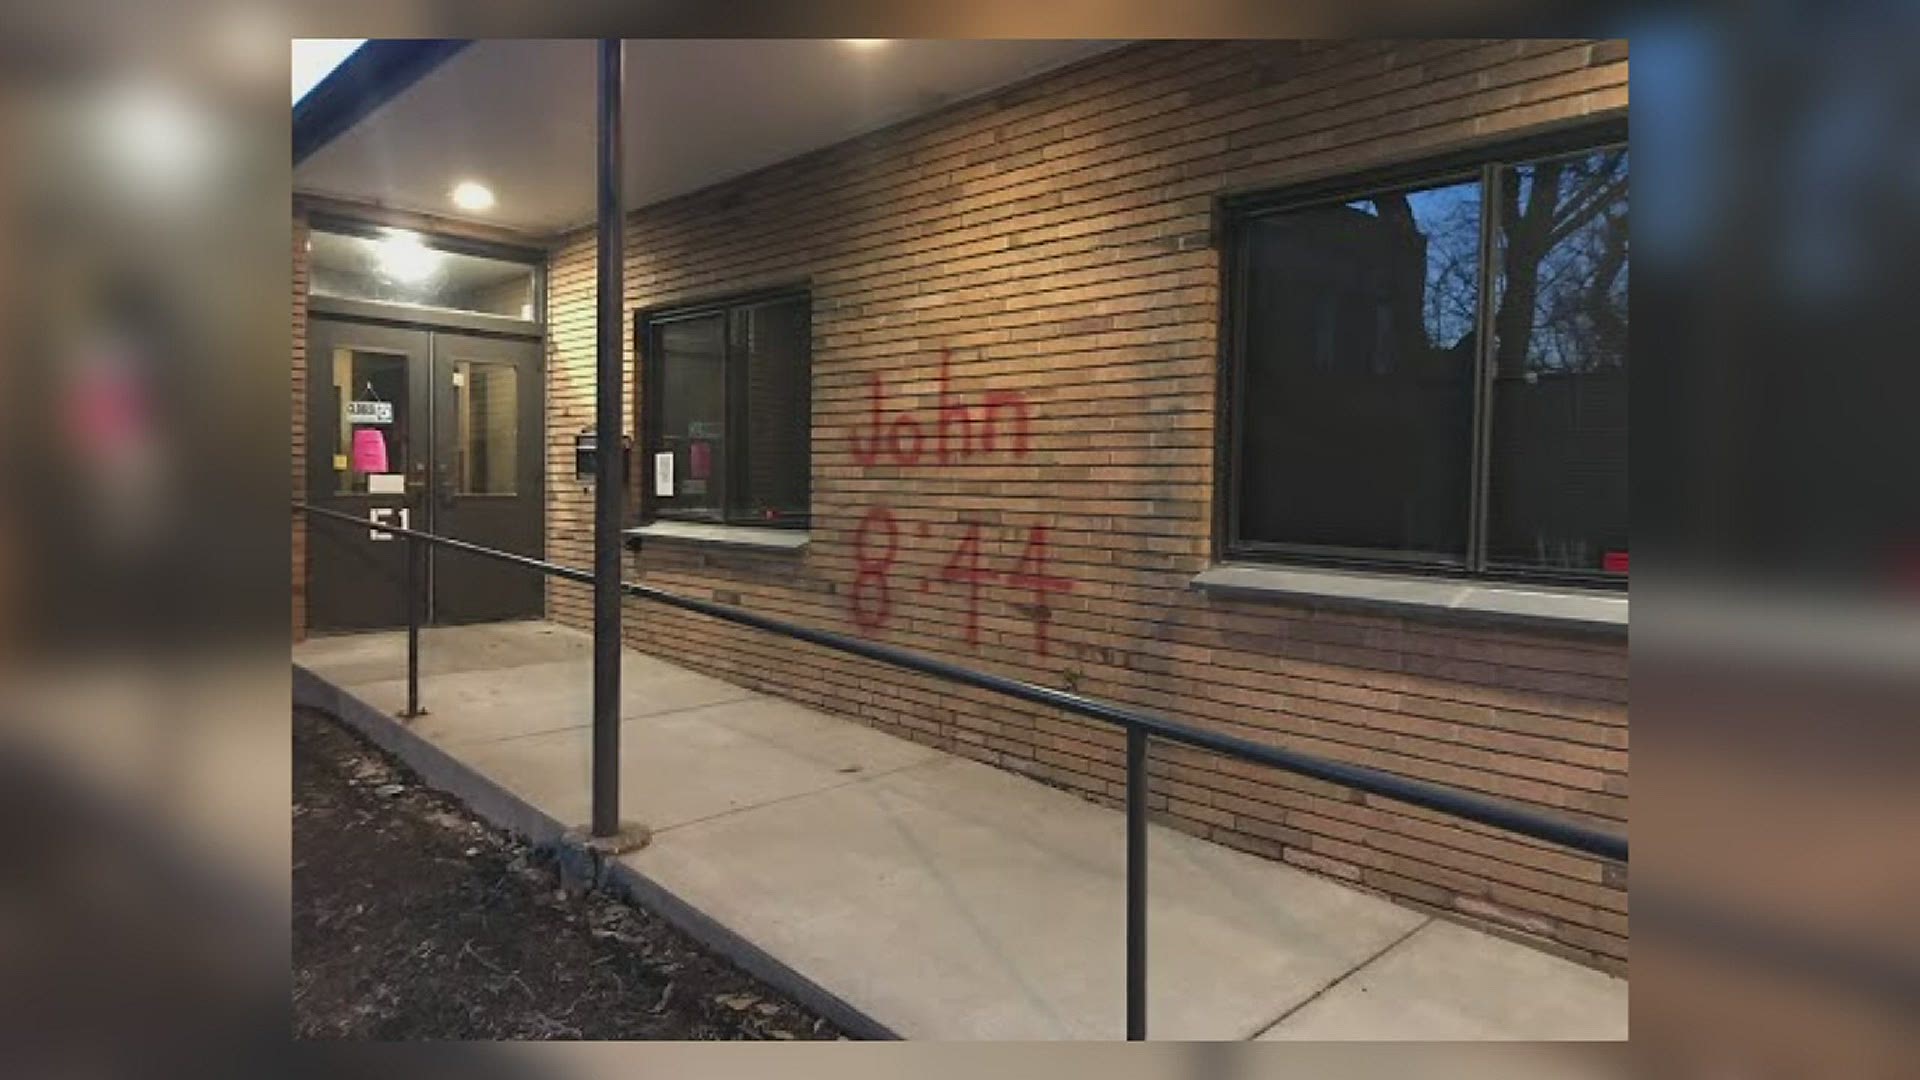 Temple Emanuel was vandalized on Thursday, with spray paint citing John 8:44, a verse in the New Testament in the Christian Bible.